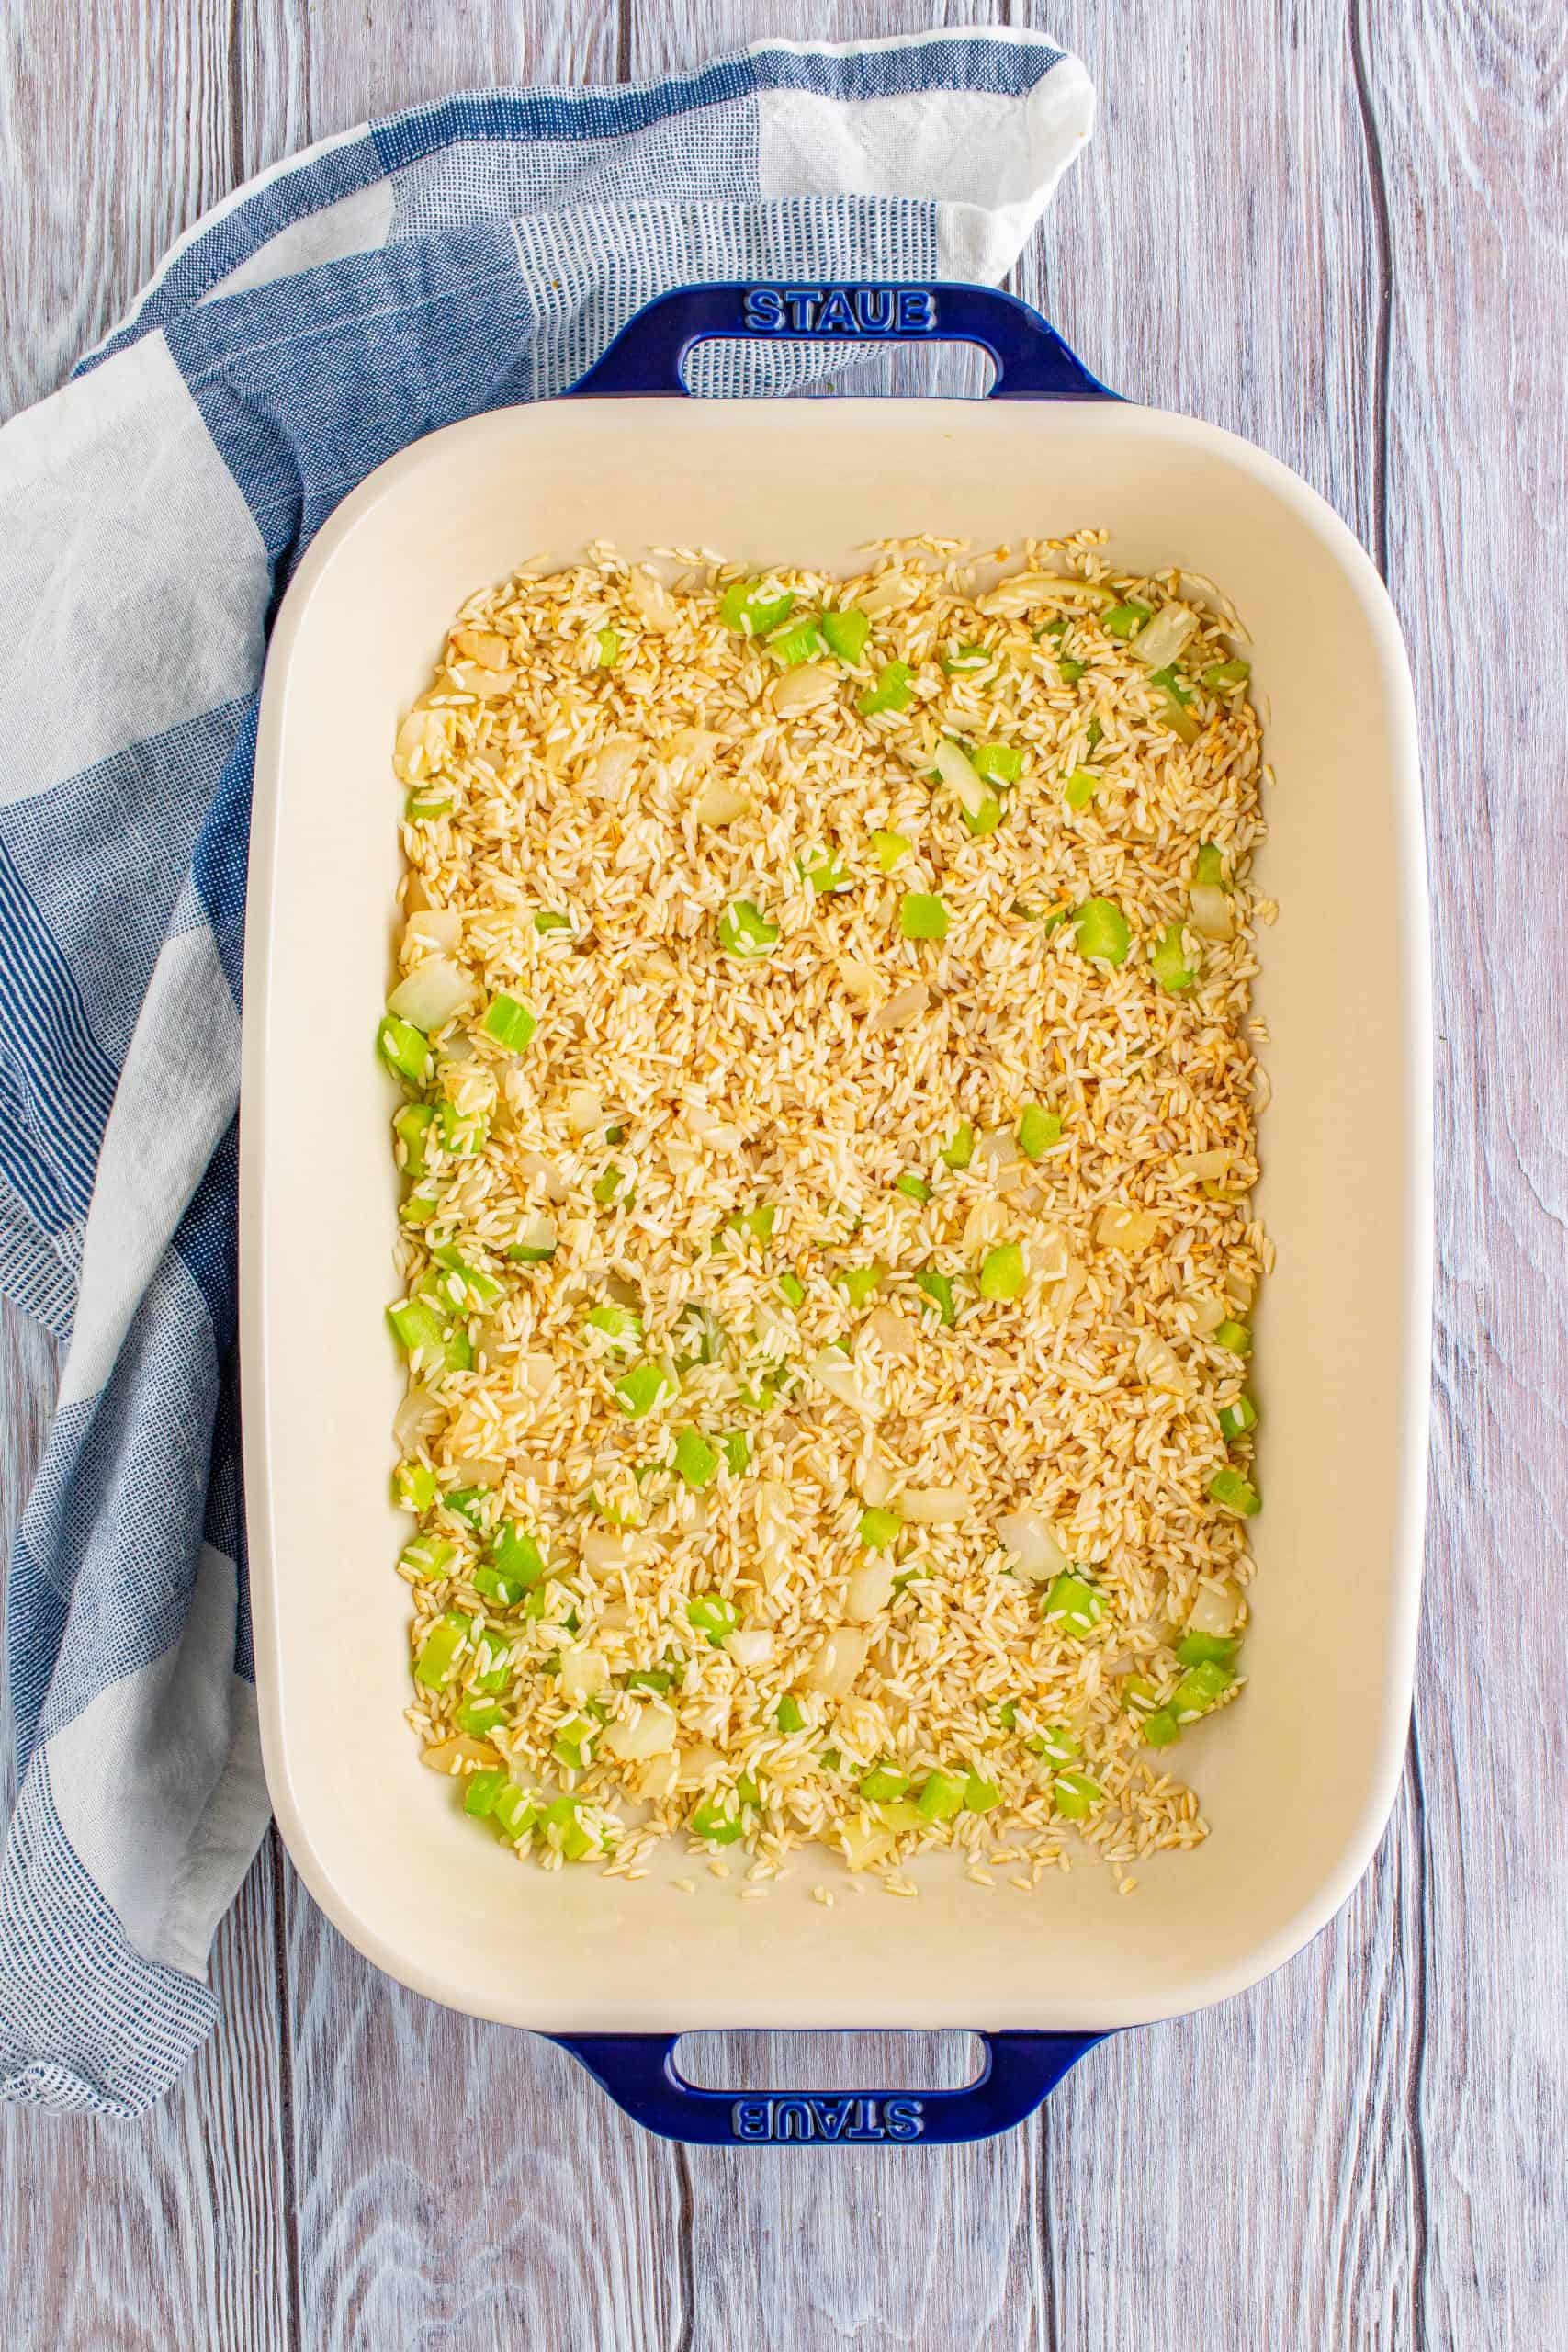 rice, cooked celery and onion in a baking dish.